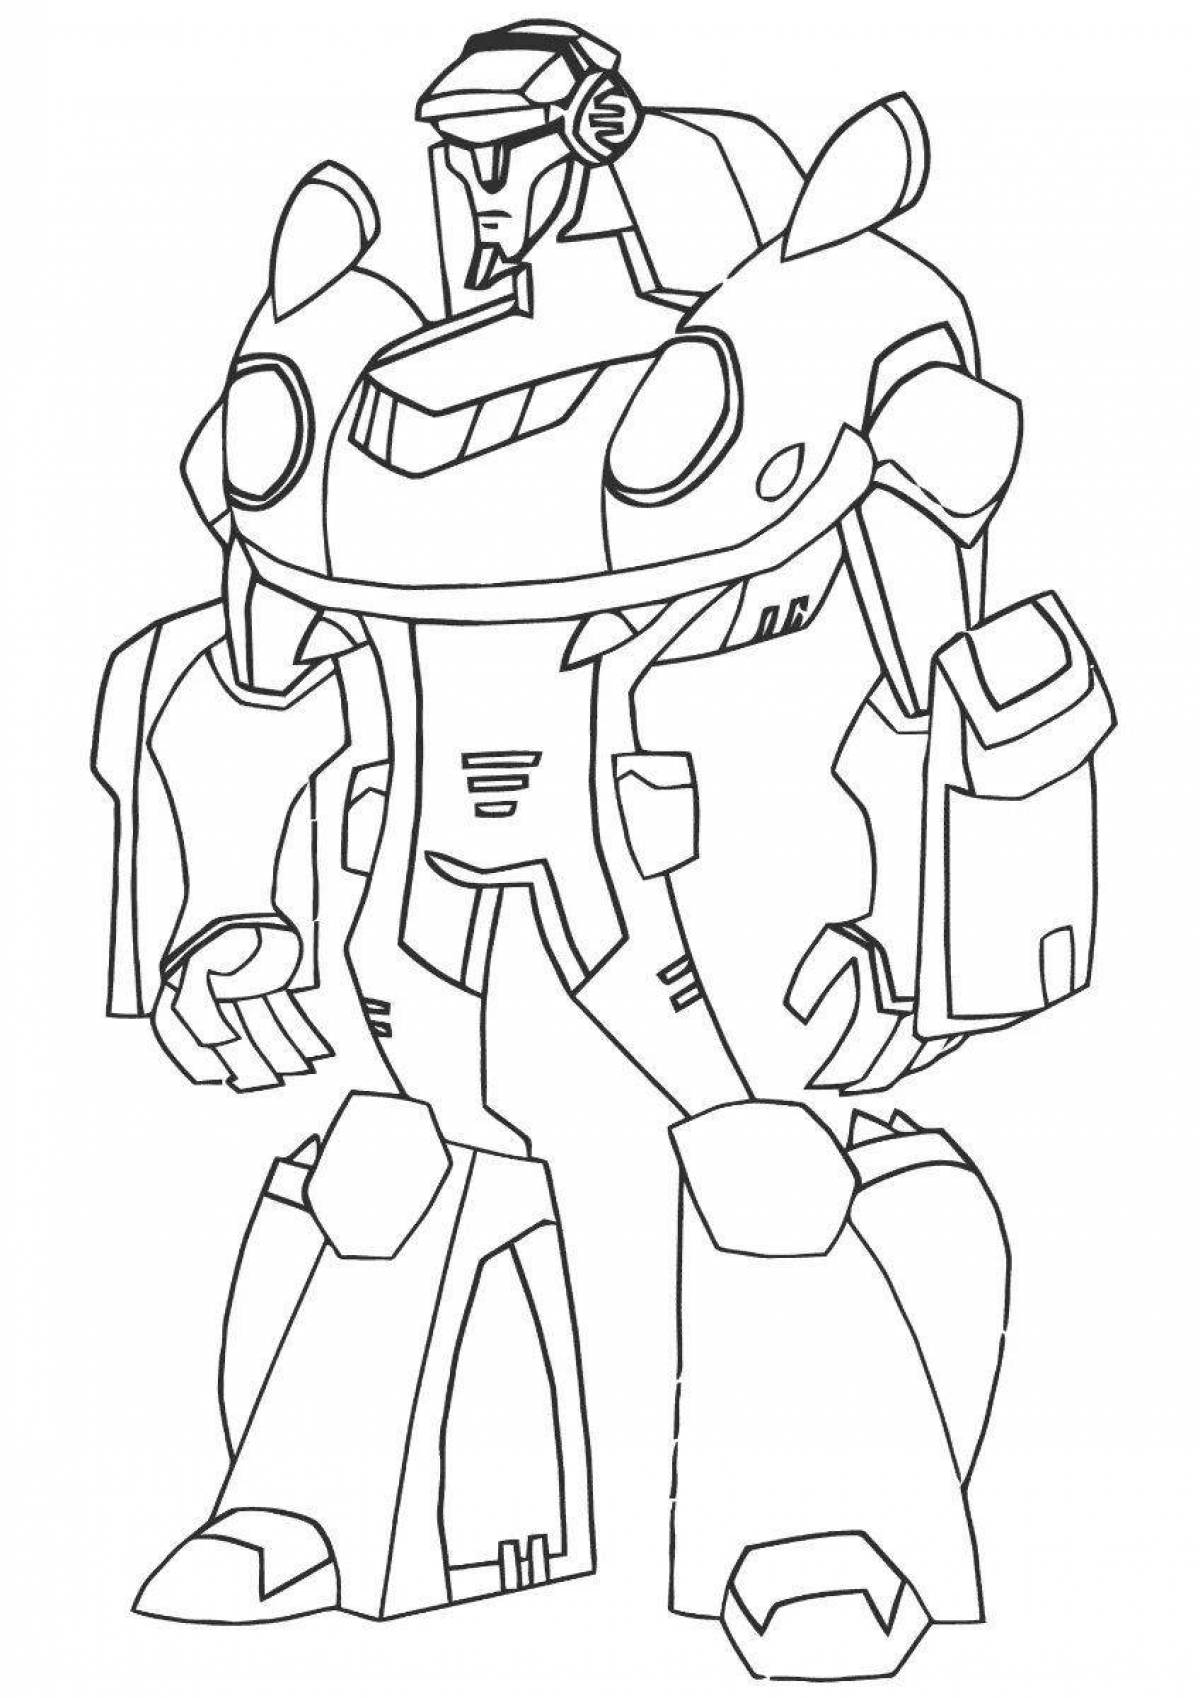 Exciting tobot boys coloring pages